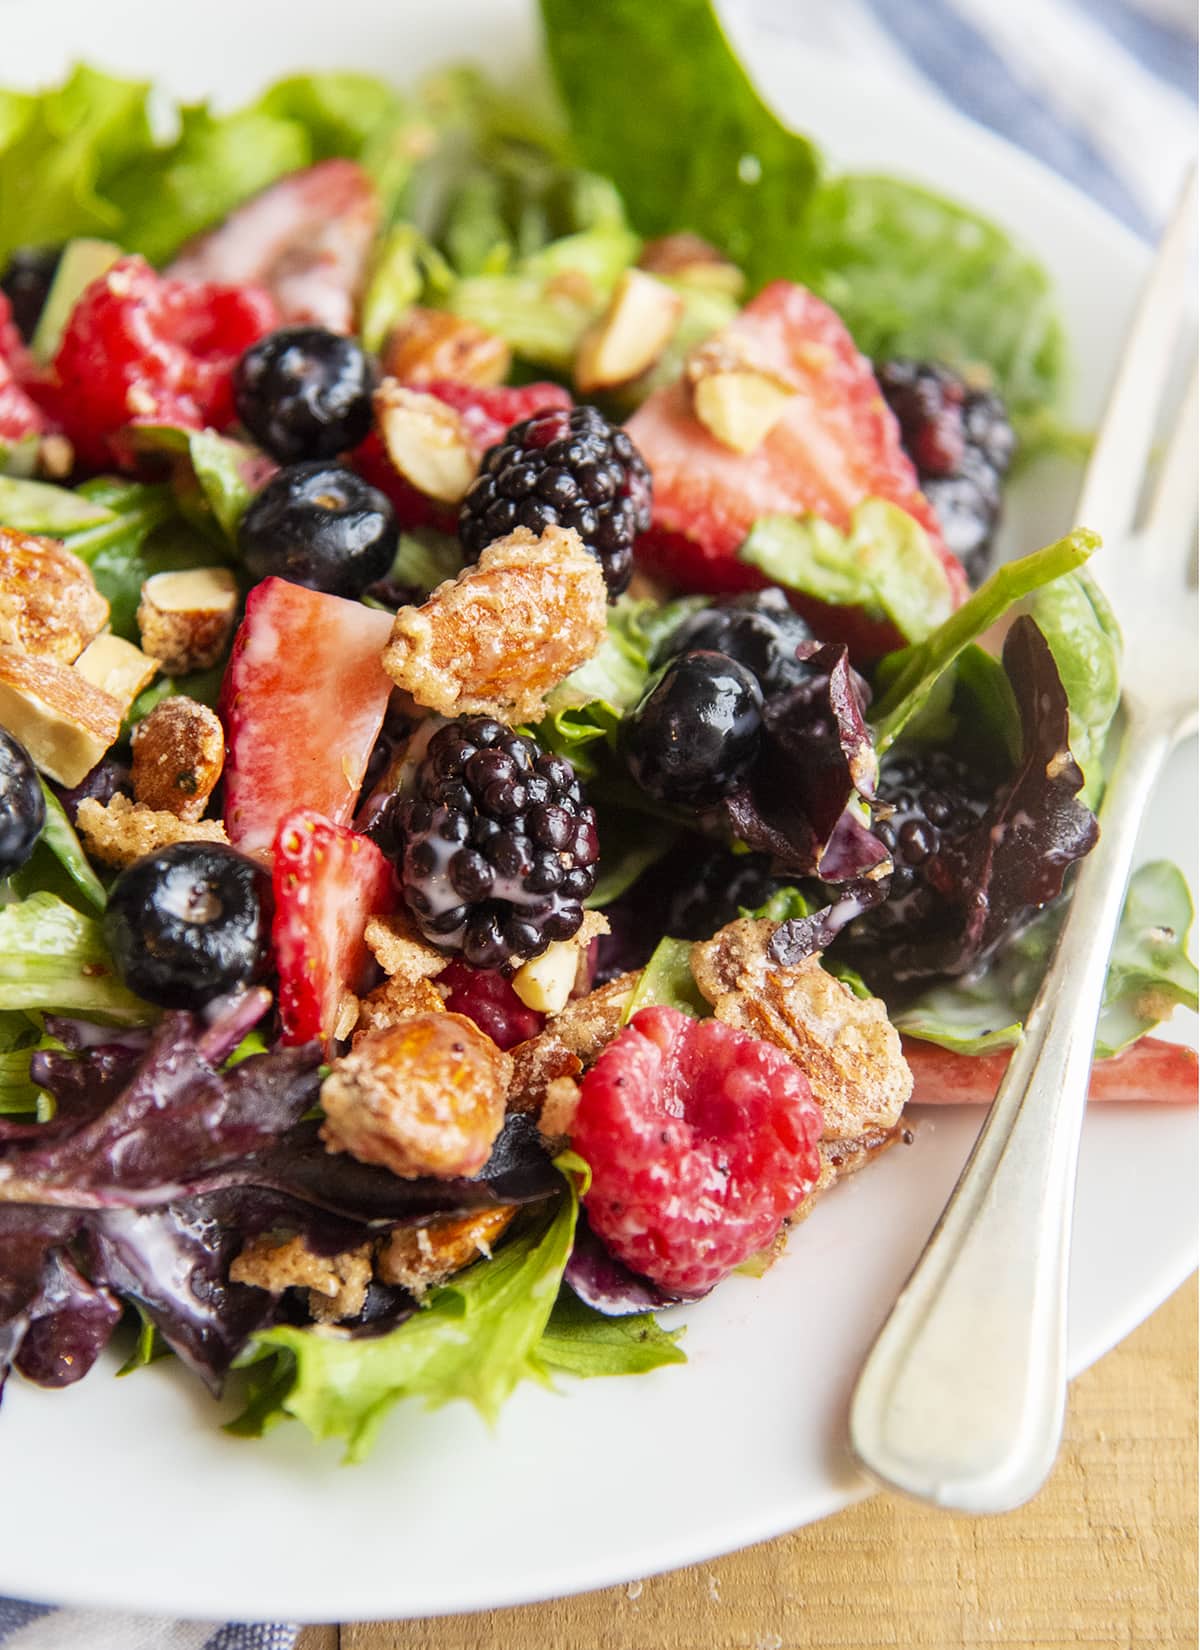 A summer berry salad tossed in poppy seed dressing on a plate.